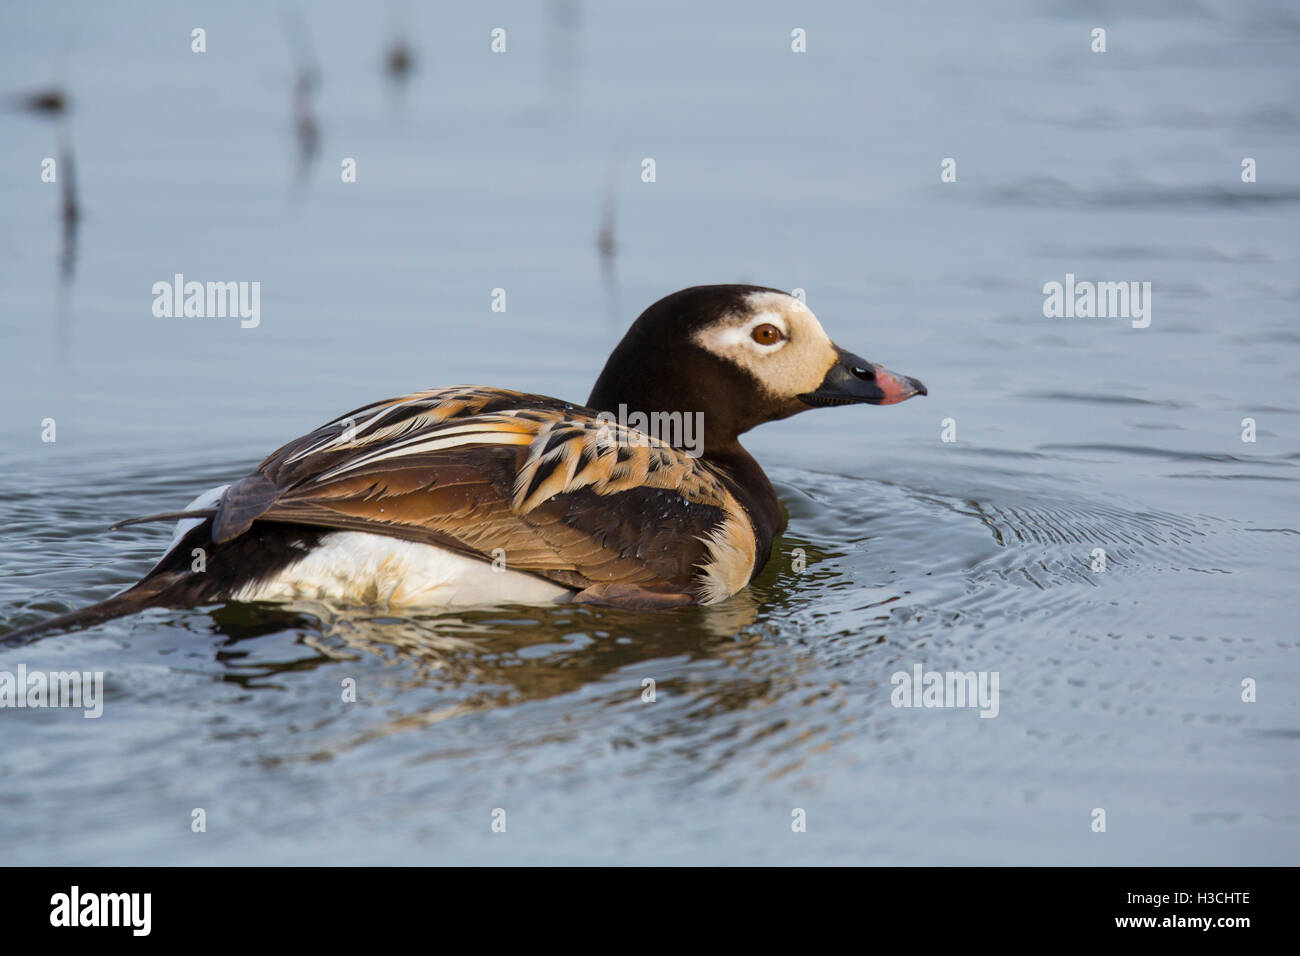 Long-tailed duck (Clangula hyemalis), once known as oldsquaw, Arctic Alaska. Stock Photo